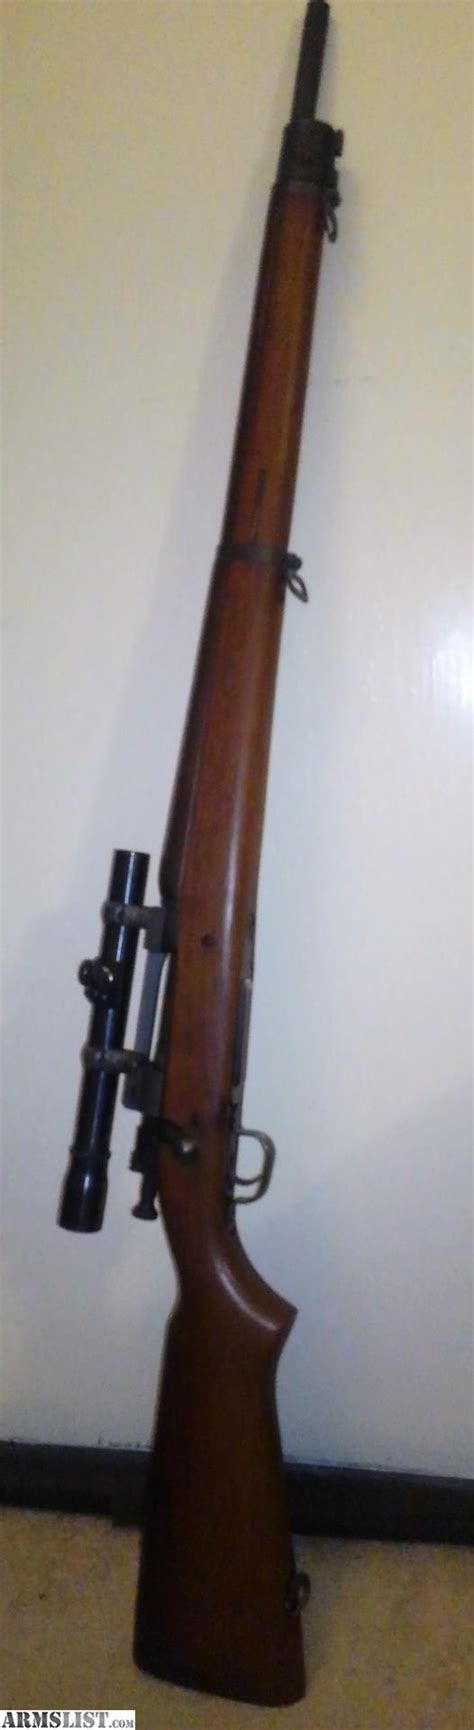 Armslist For Sale 1903a4 Springfield Sniper Rifle 1903 1903a3